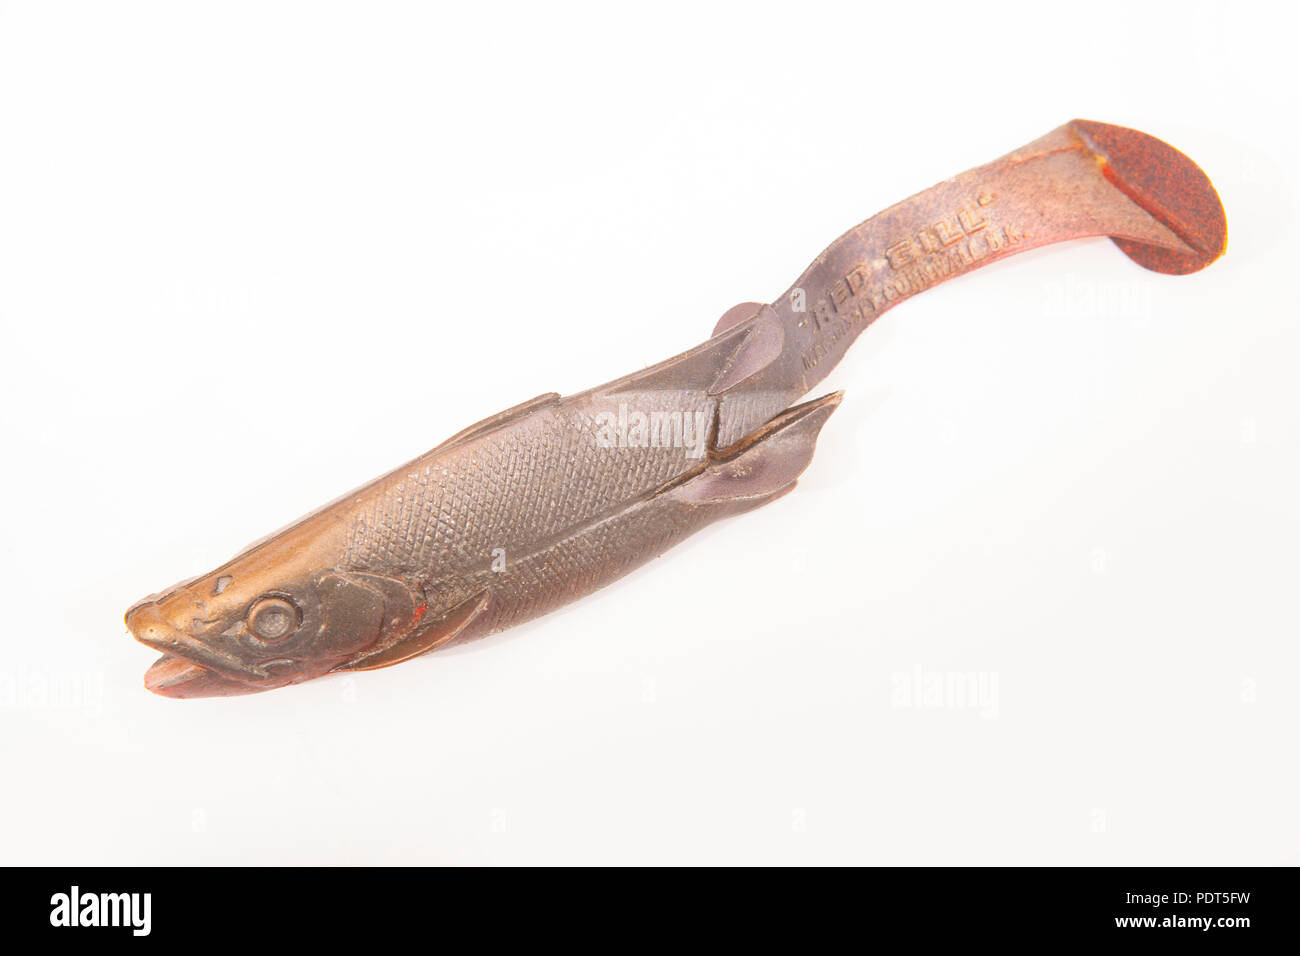 https://c8.alamy.com/comp/PDT5FW/an-old-red-gill-fishing-lure-designed-for-catching-seafish-from-a-fishing-tackle-collection-dorset-england-uk-gb-PDT5FW.jpg